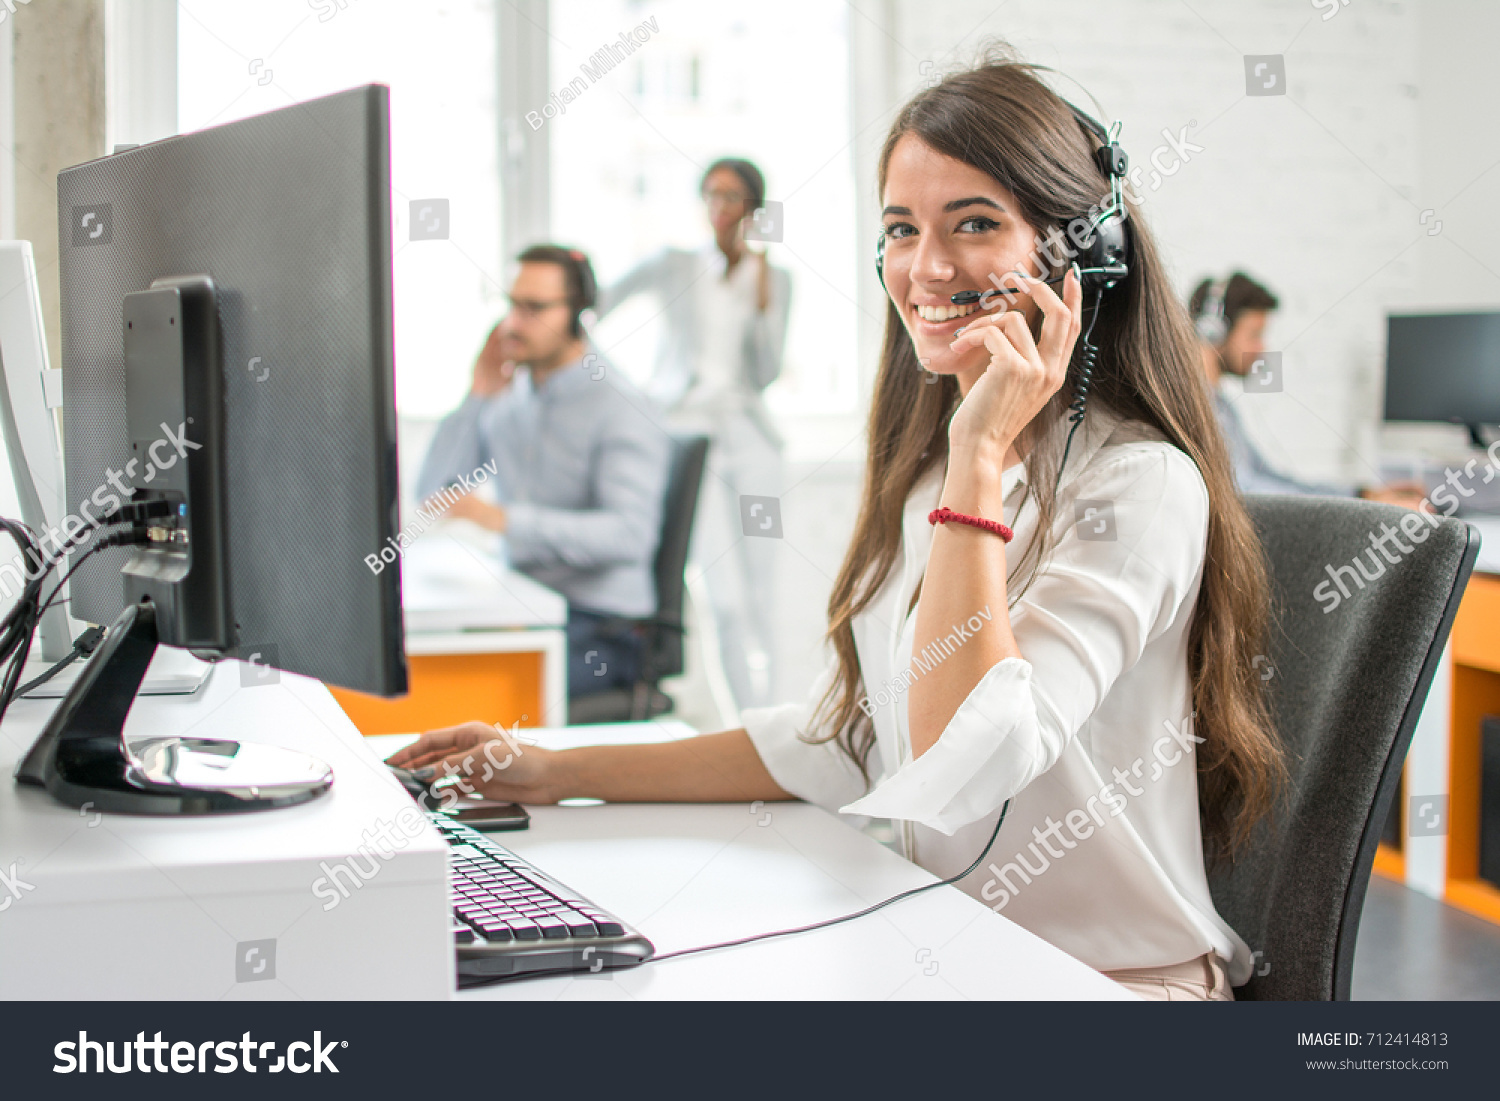 Young friendly operator woman agent with headsets working in a call centre. #712414813